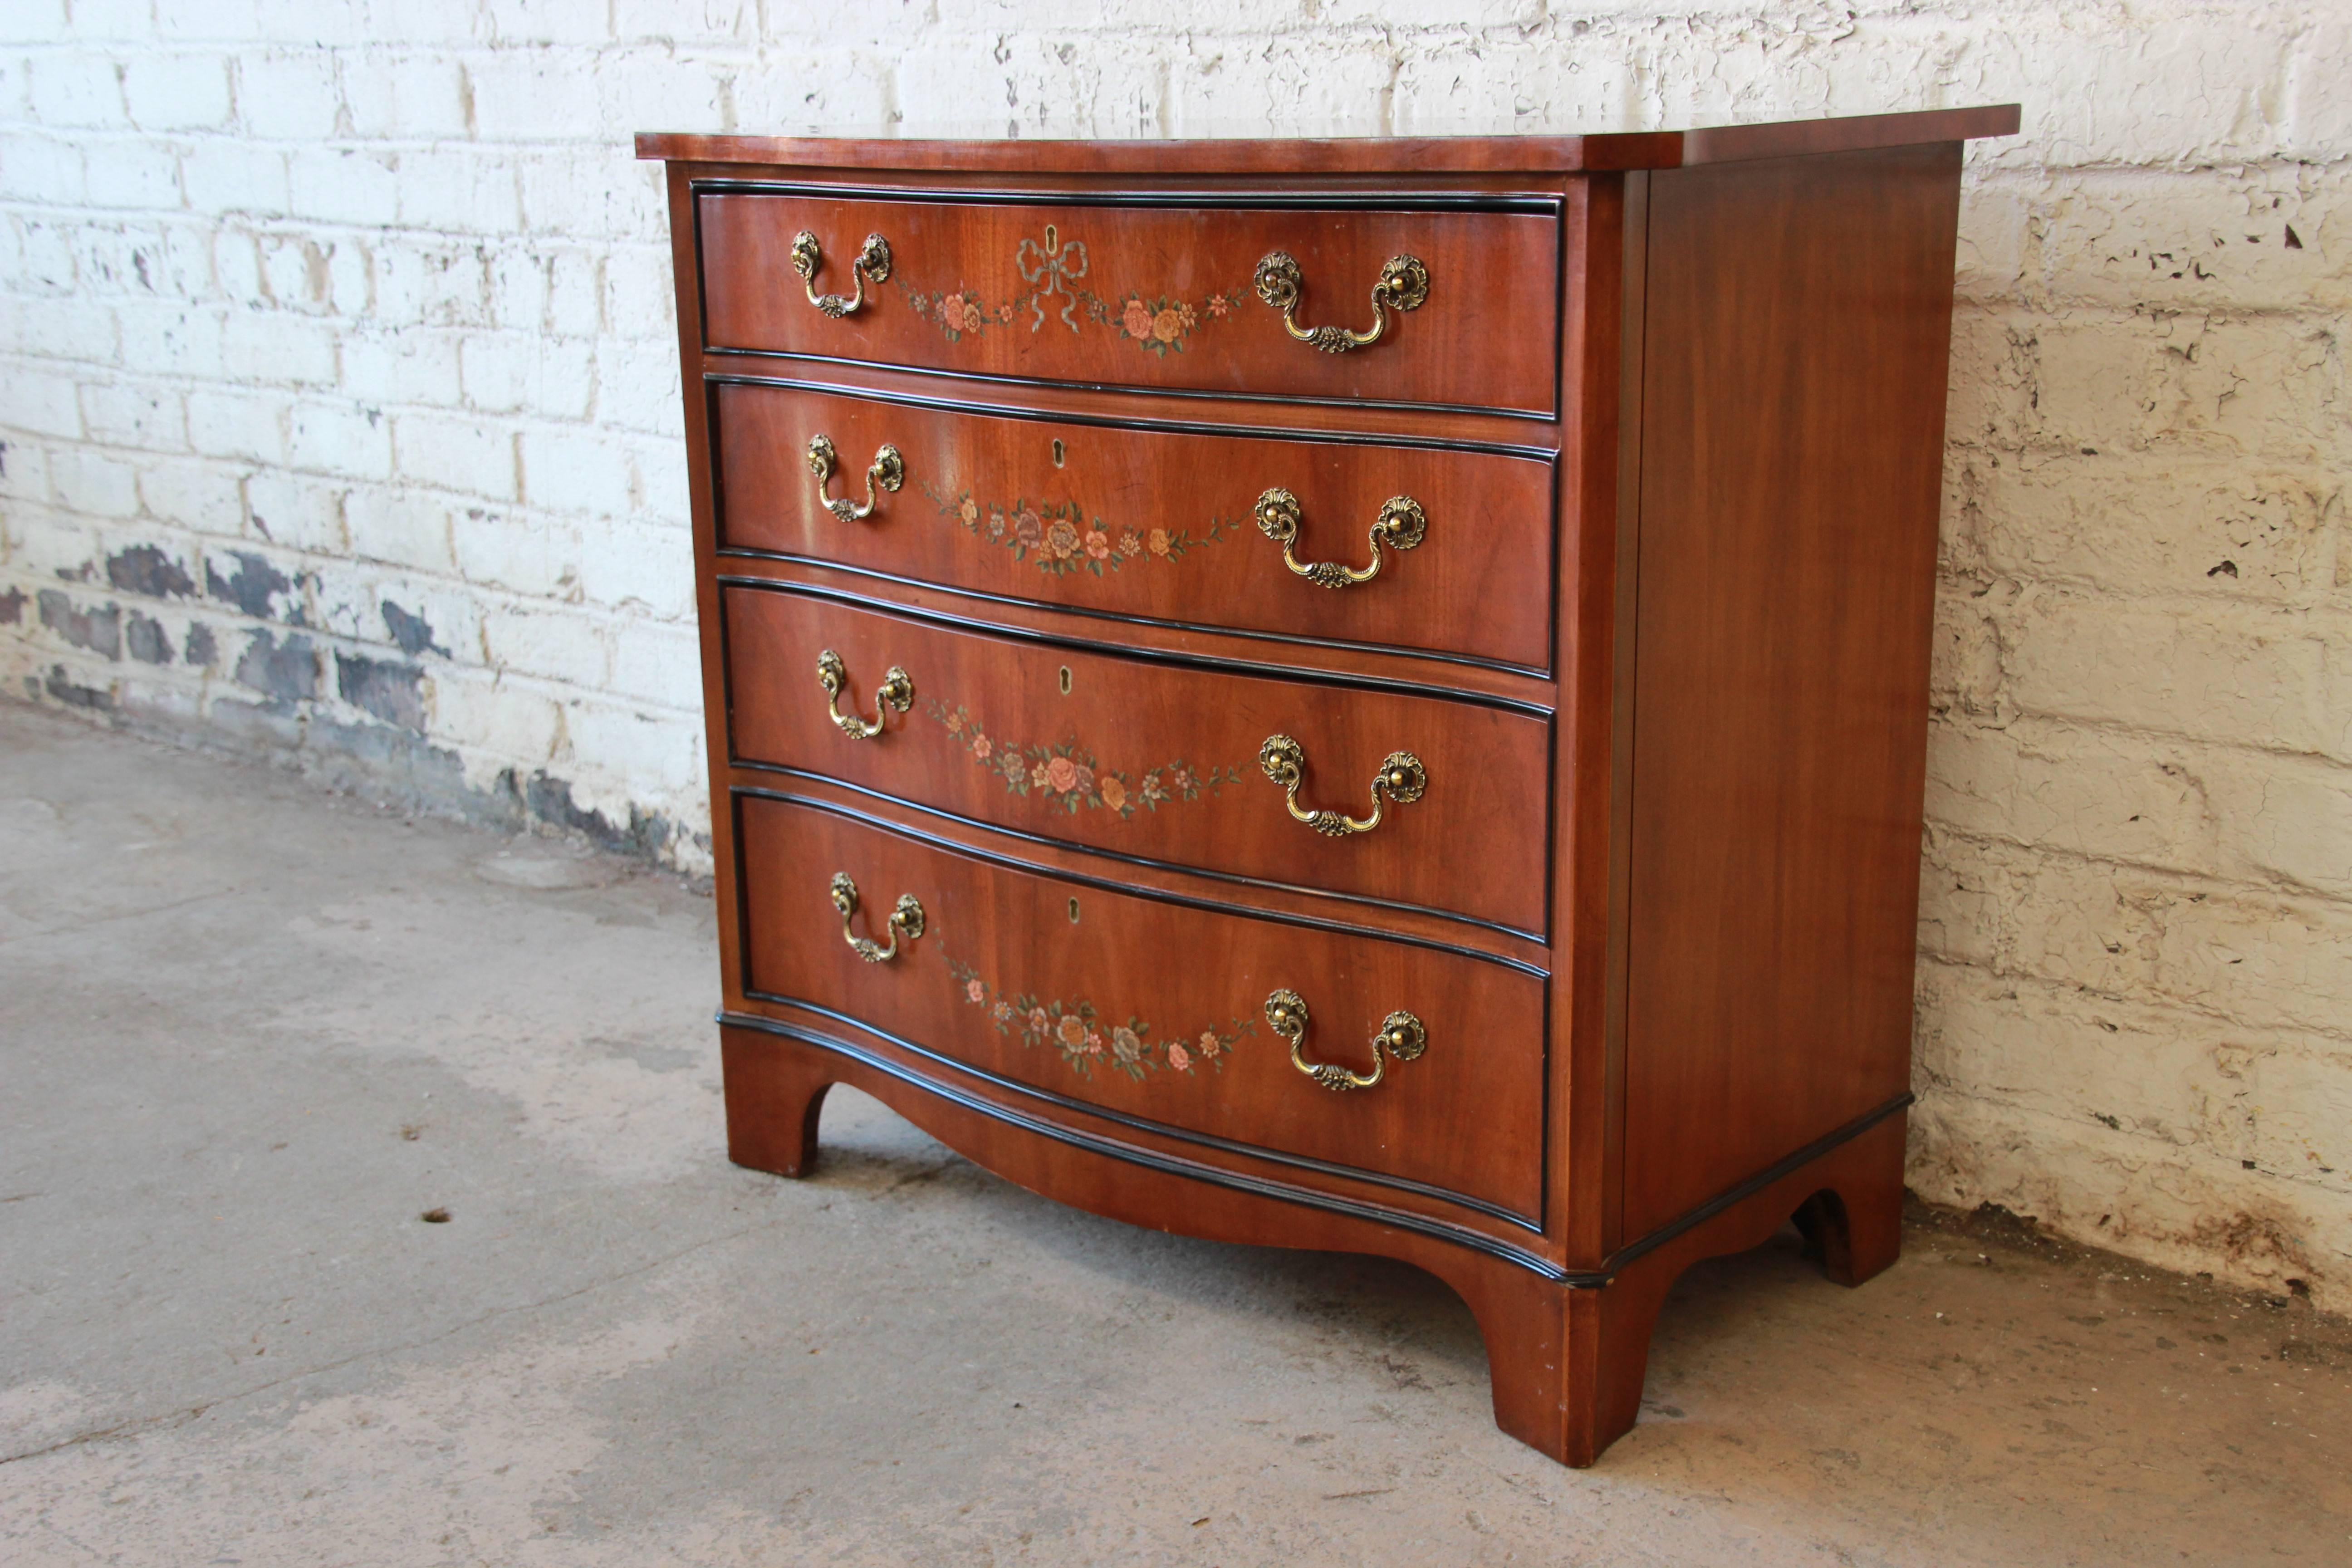 A very nice satinwood hand-painted Adam style chest of drawers or commode from the Devoncourt Collection by Drexel Heritage. The cabinet features gorgeous hand-painted floral details and beautiful satinwood grain. It has a nice traditional style and